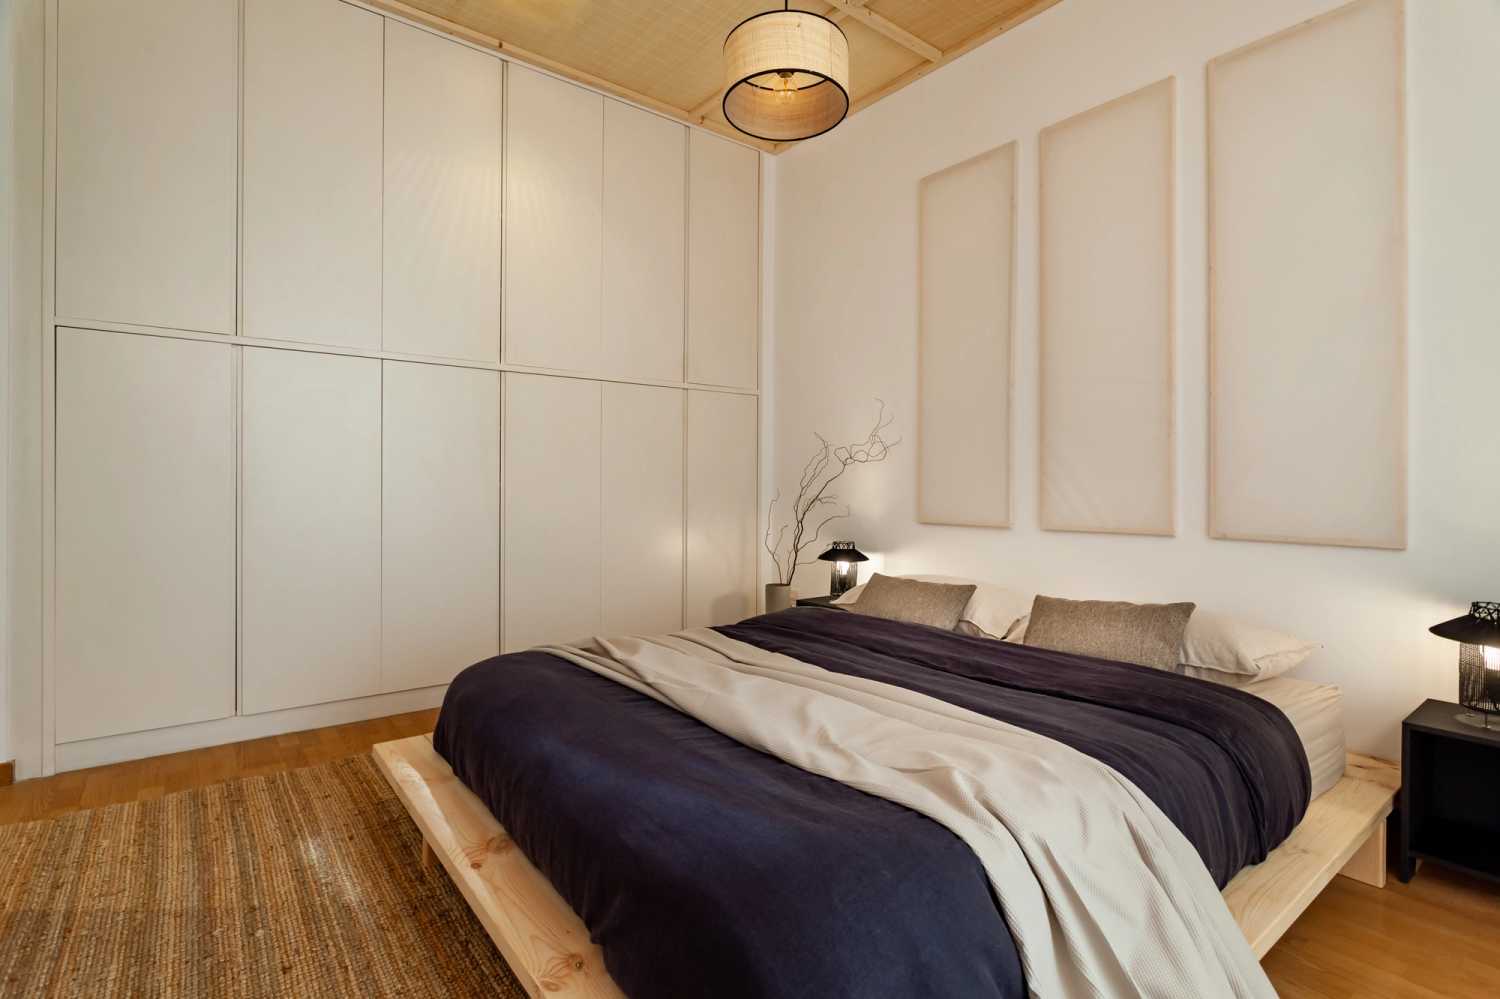 1653911423-ukio-barcelona-diagonal-king-size-bedroom-with-blue-quilt-and-beige-colors-walls.jpg